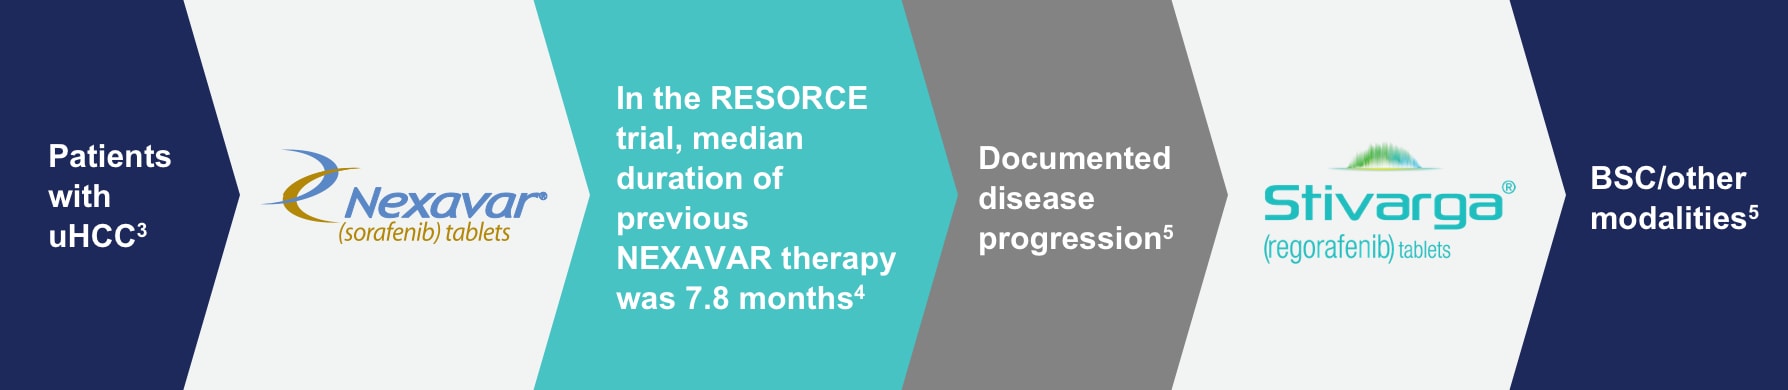 Systemic treatment plan established from RESORCE trial data.